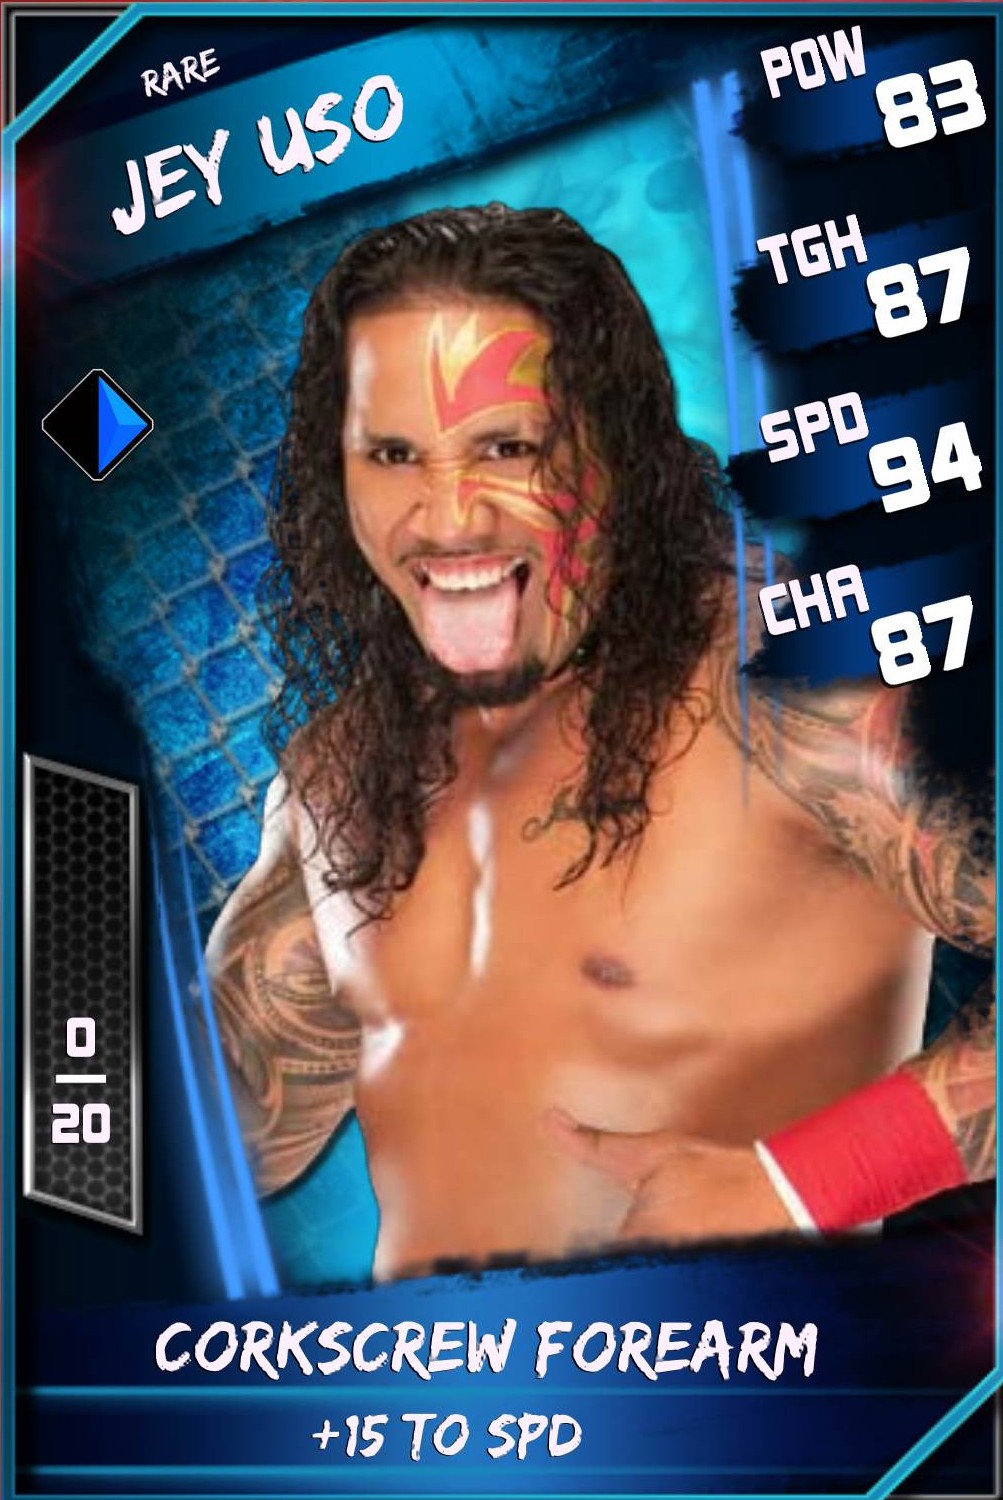 WWE SuperCard Review: A Fun, Addictive Mobile Experience That Needs A Bit of Fine-Tuning